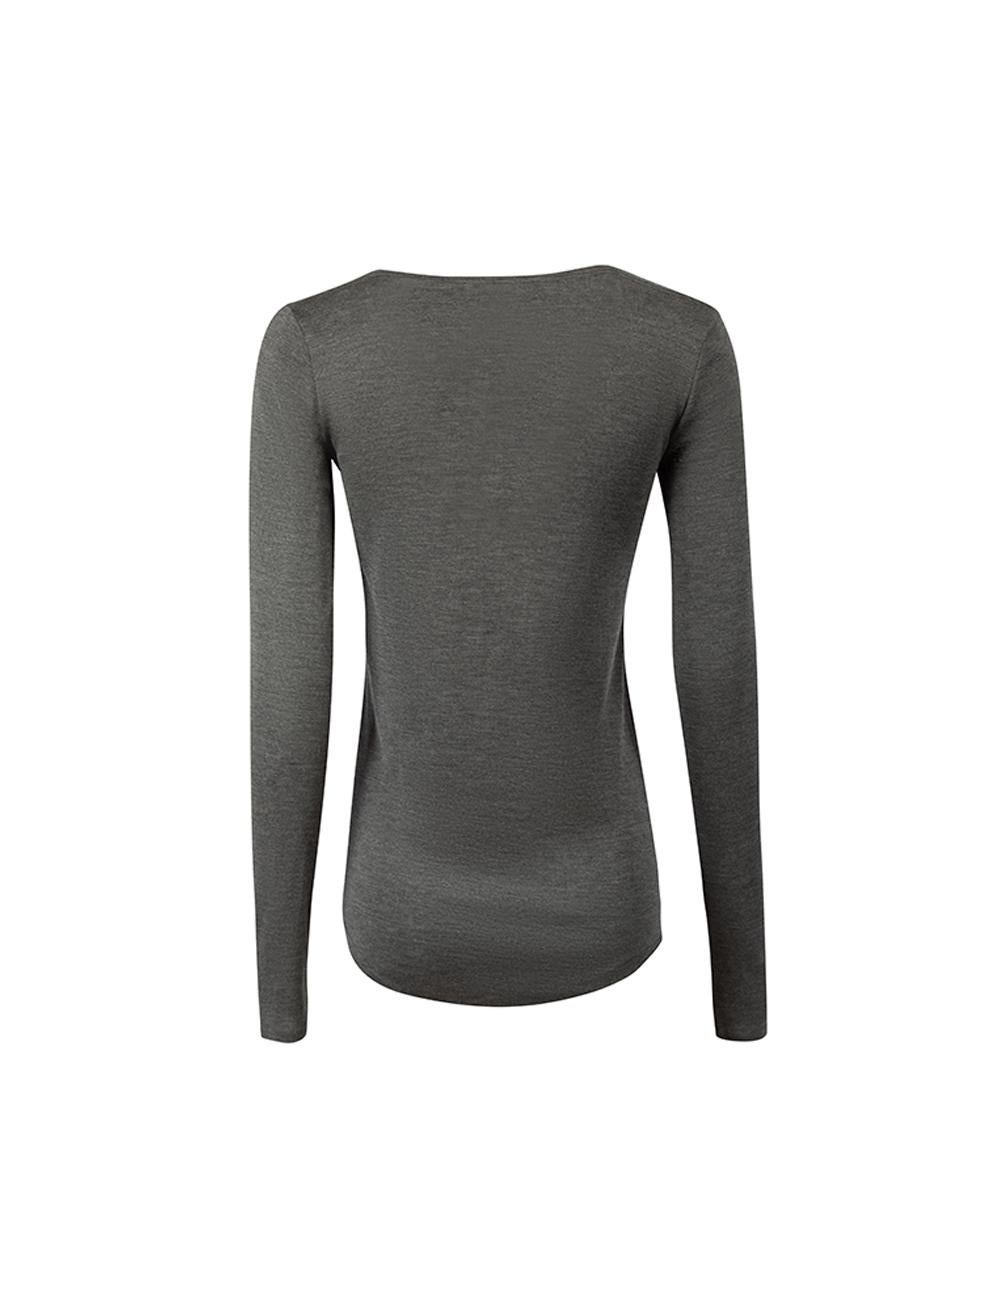 Grey Cut Out Neckline Top Size L In Good Condition In London, GB